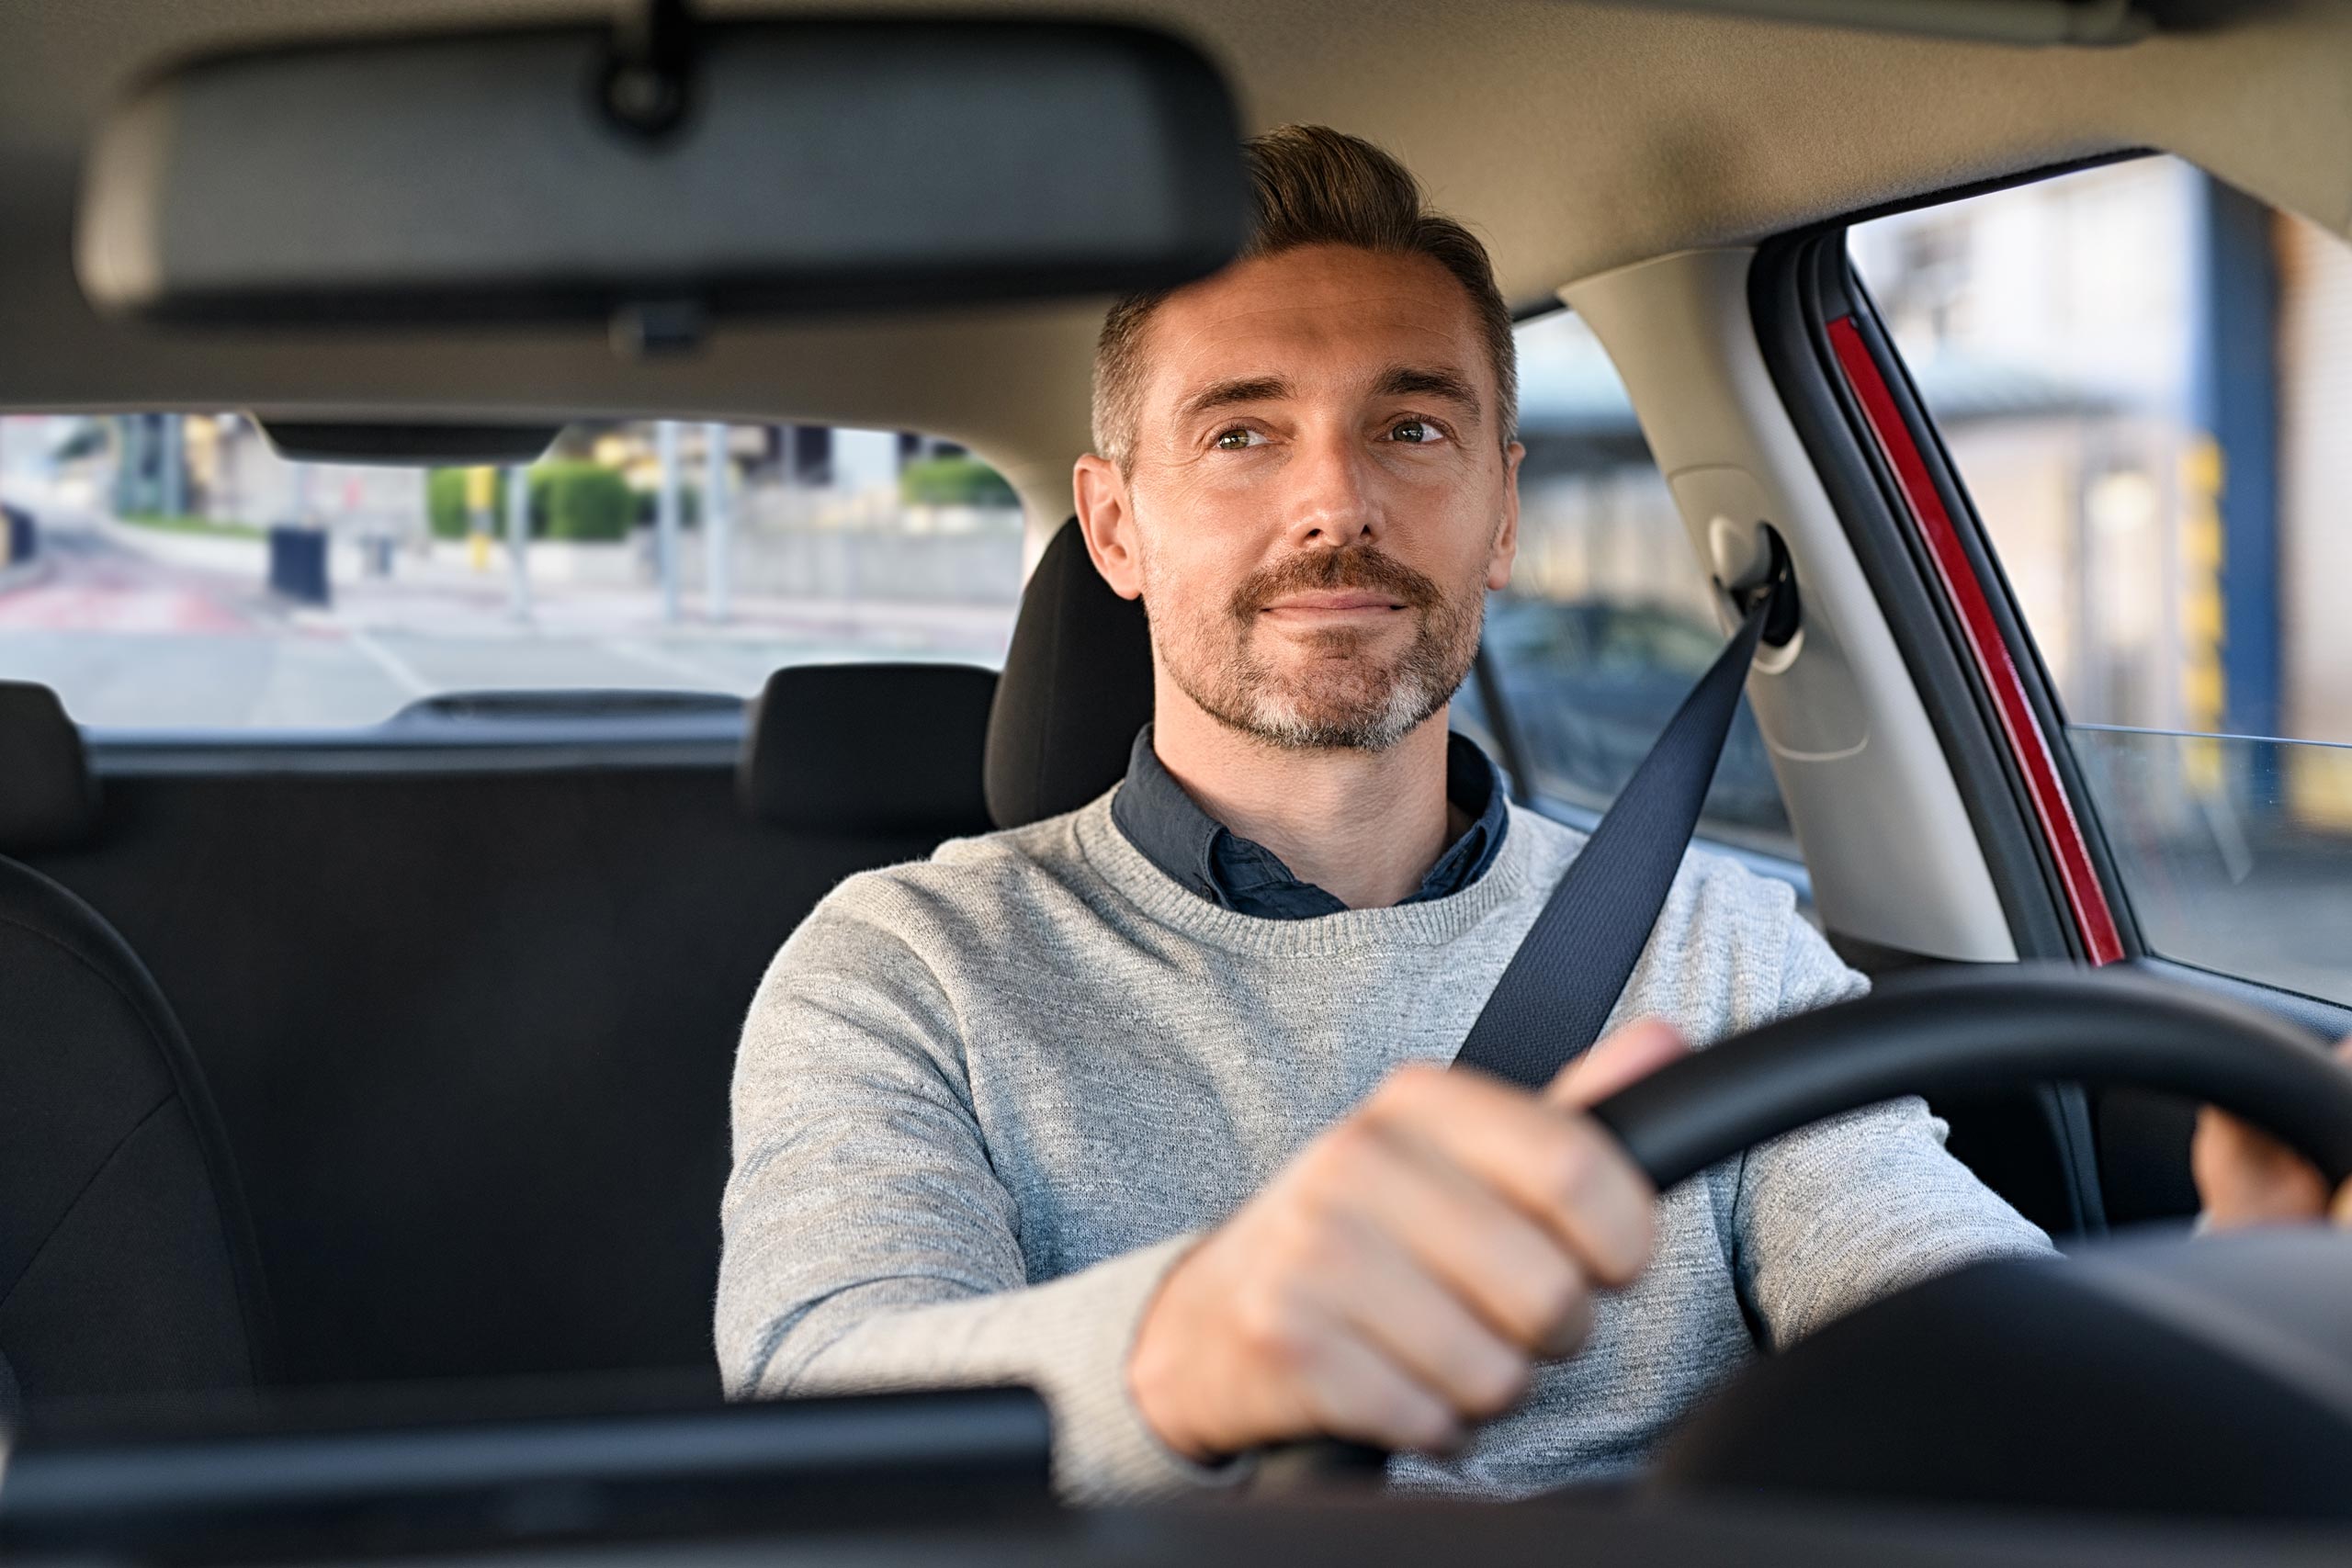 Handsome middle aged man with short facial hair driving a car